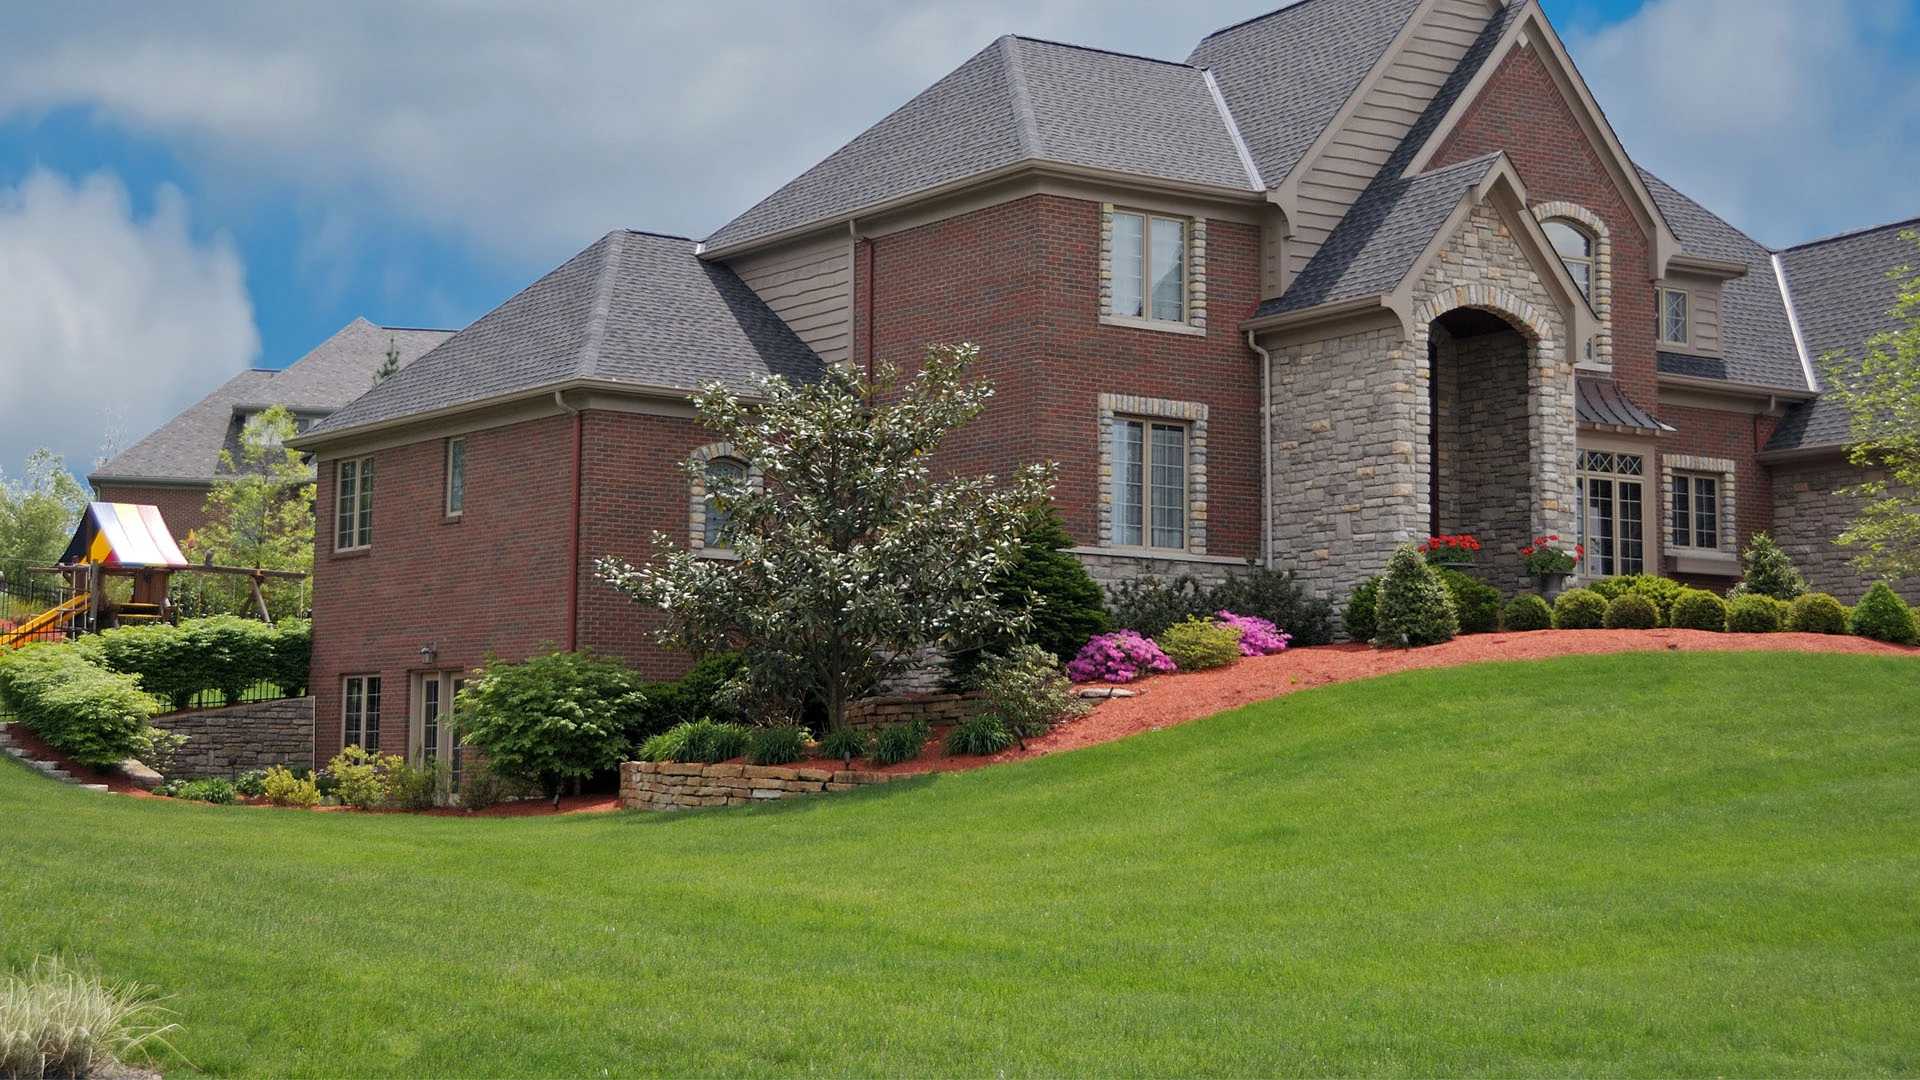 Recently mowed residential property in Noblesville, IN.